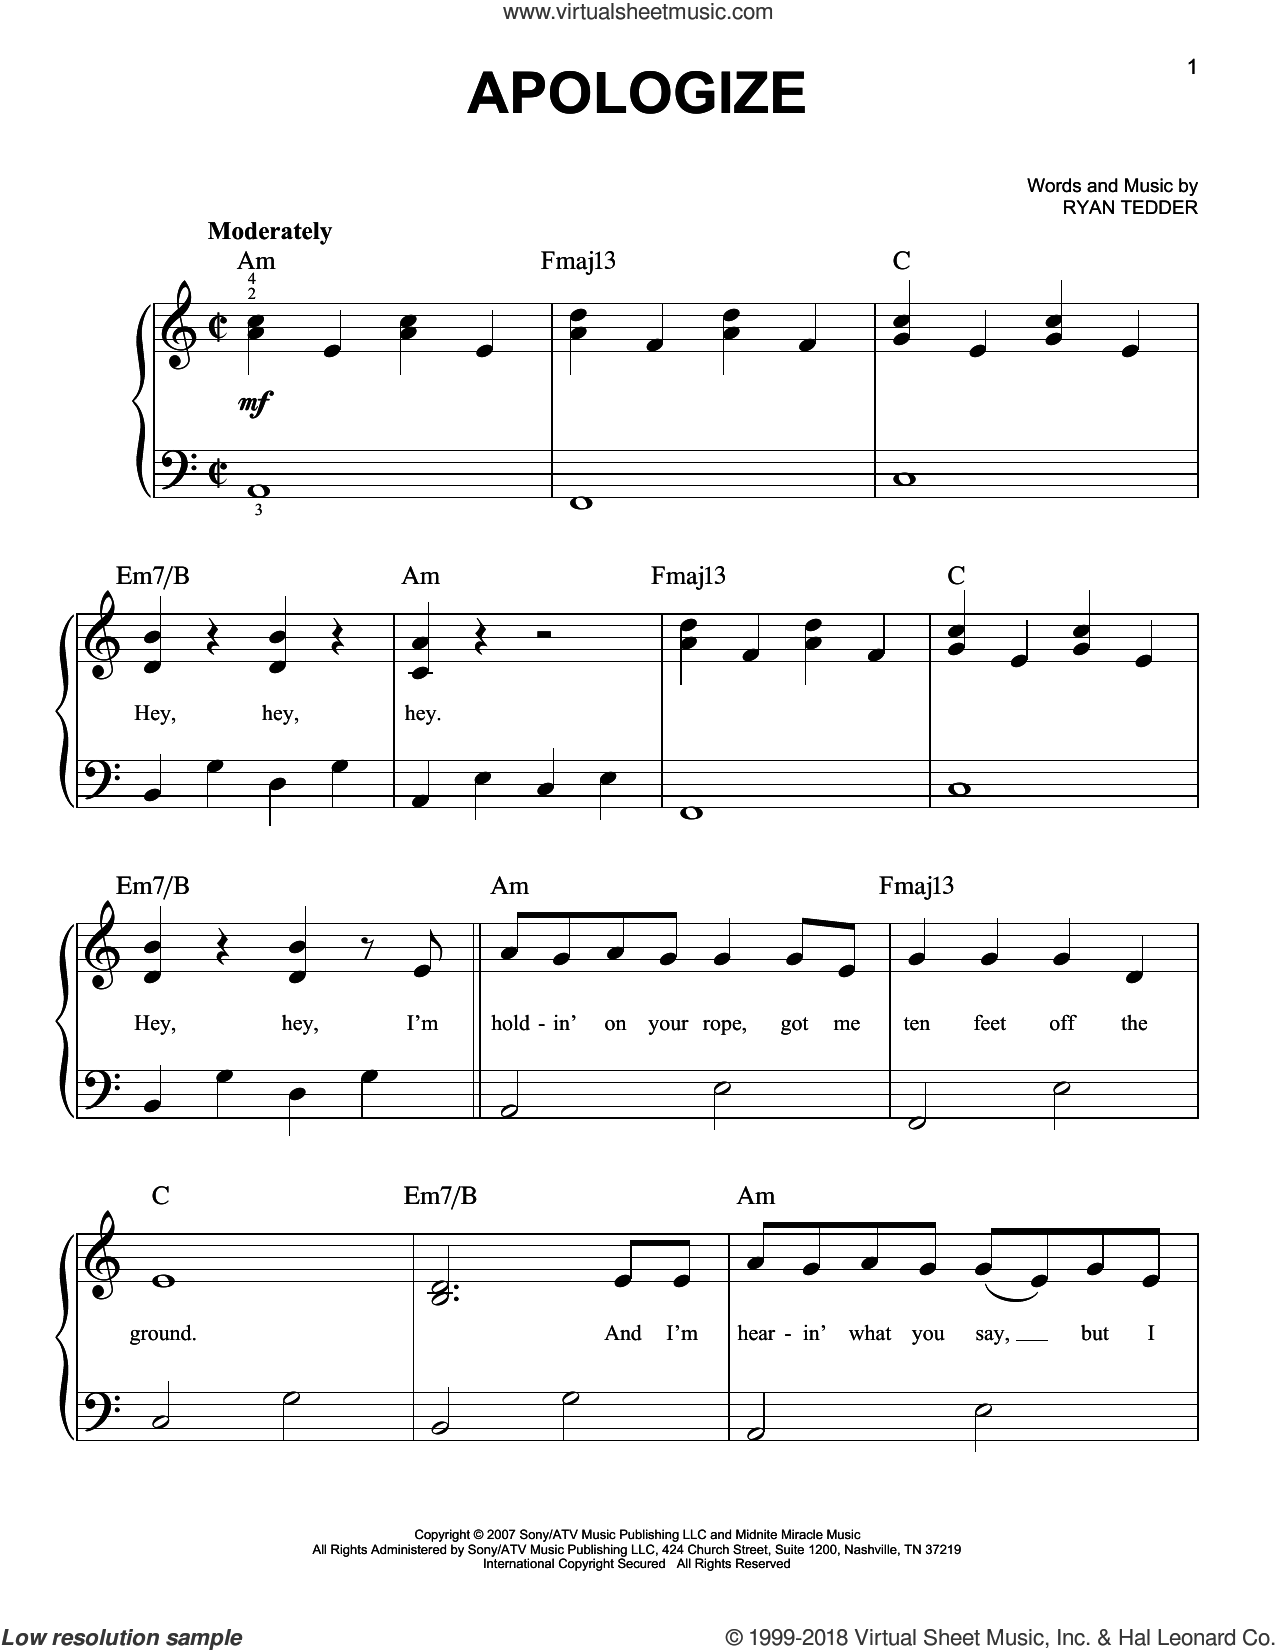 Apologize beginner Sheet Music For Piano Solo PDF - Apologize Piano Sheet Music Free Printable